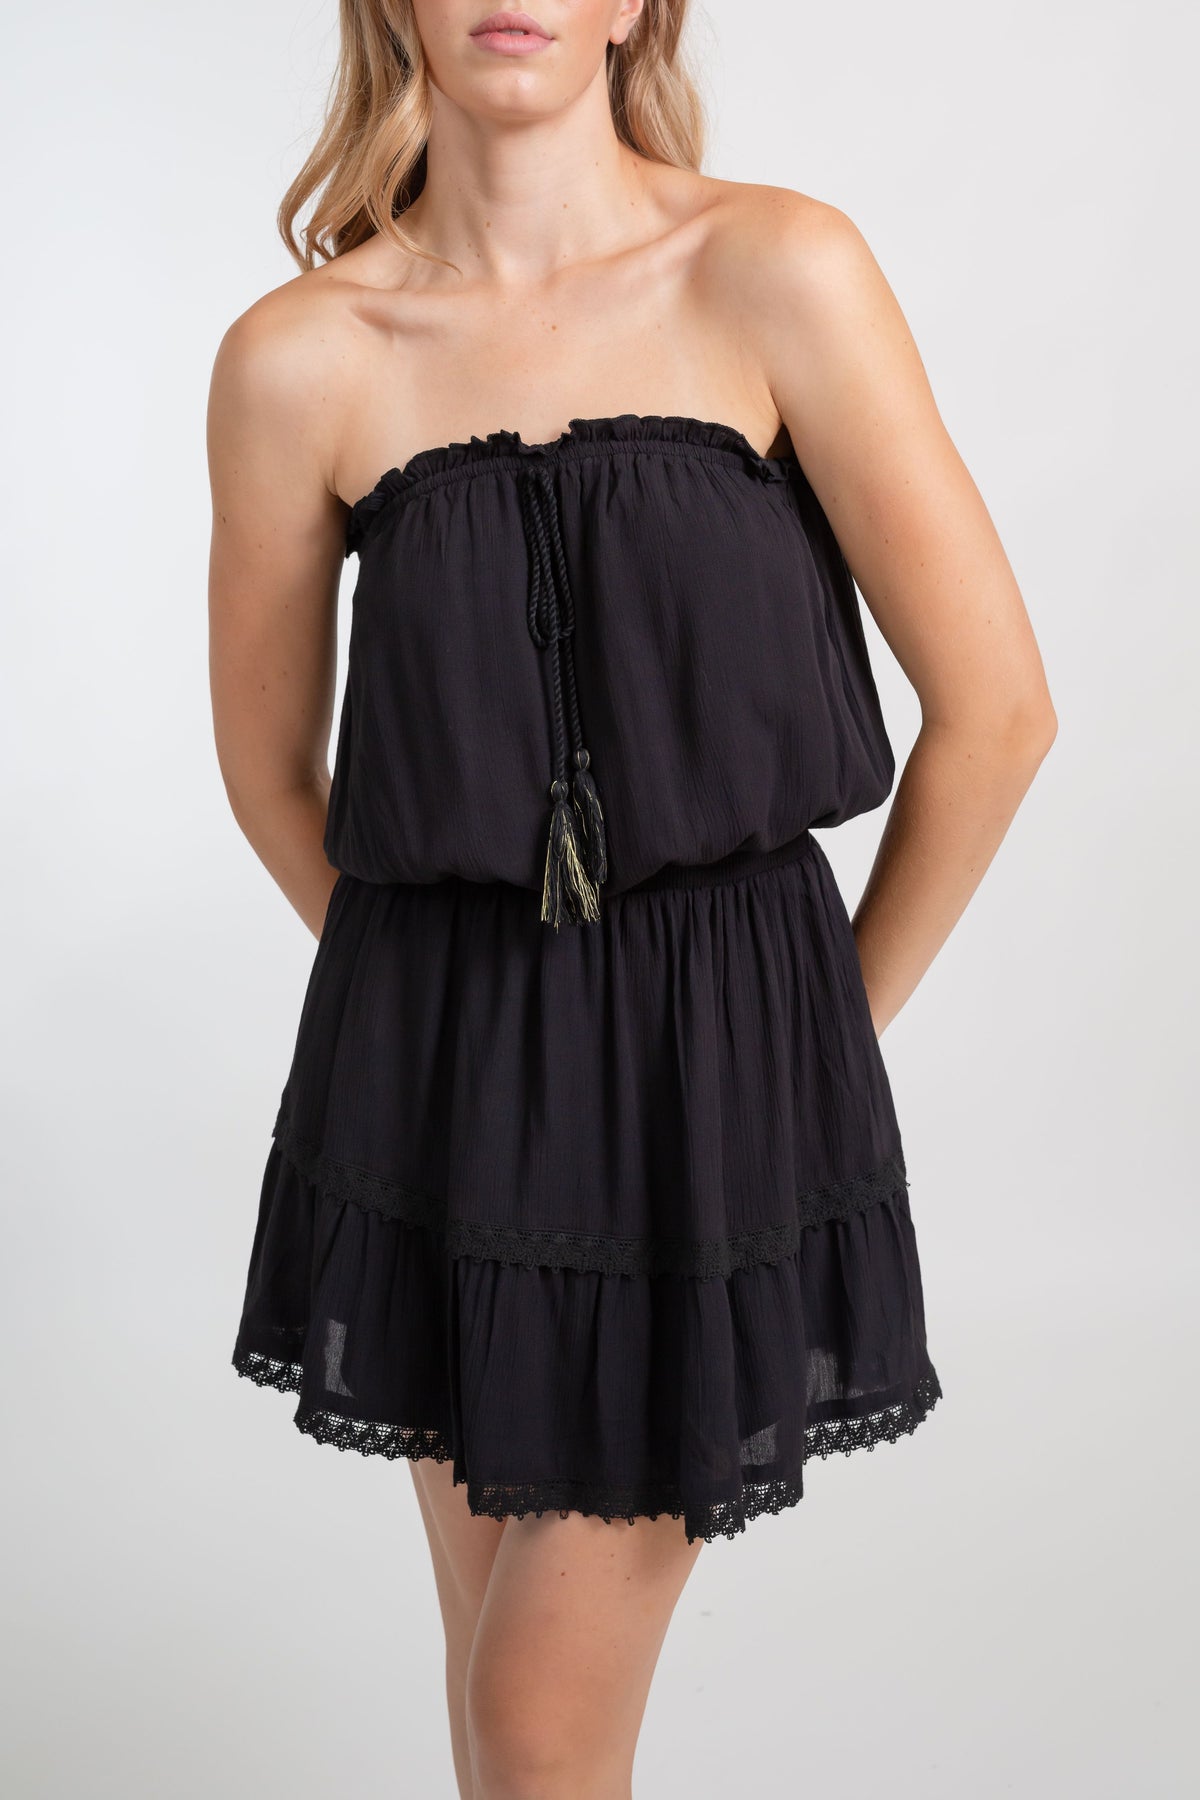 A blonde Caucasian model wearing a black color bandeau  crochet lace trim mini boho dress with metallic tassel trim, standing in a studio with her arms behind her back looking at the camera posing.